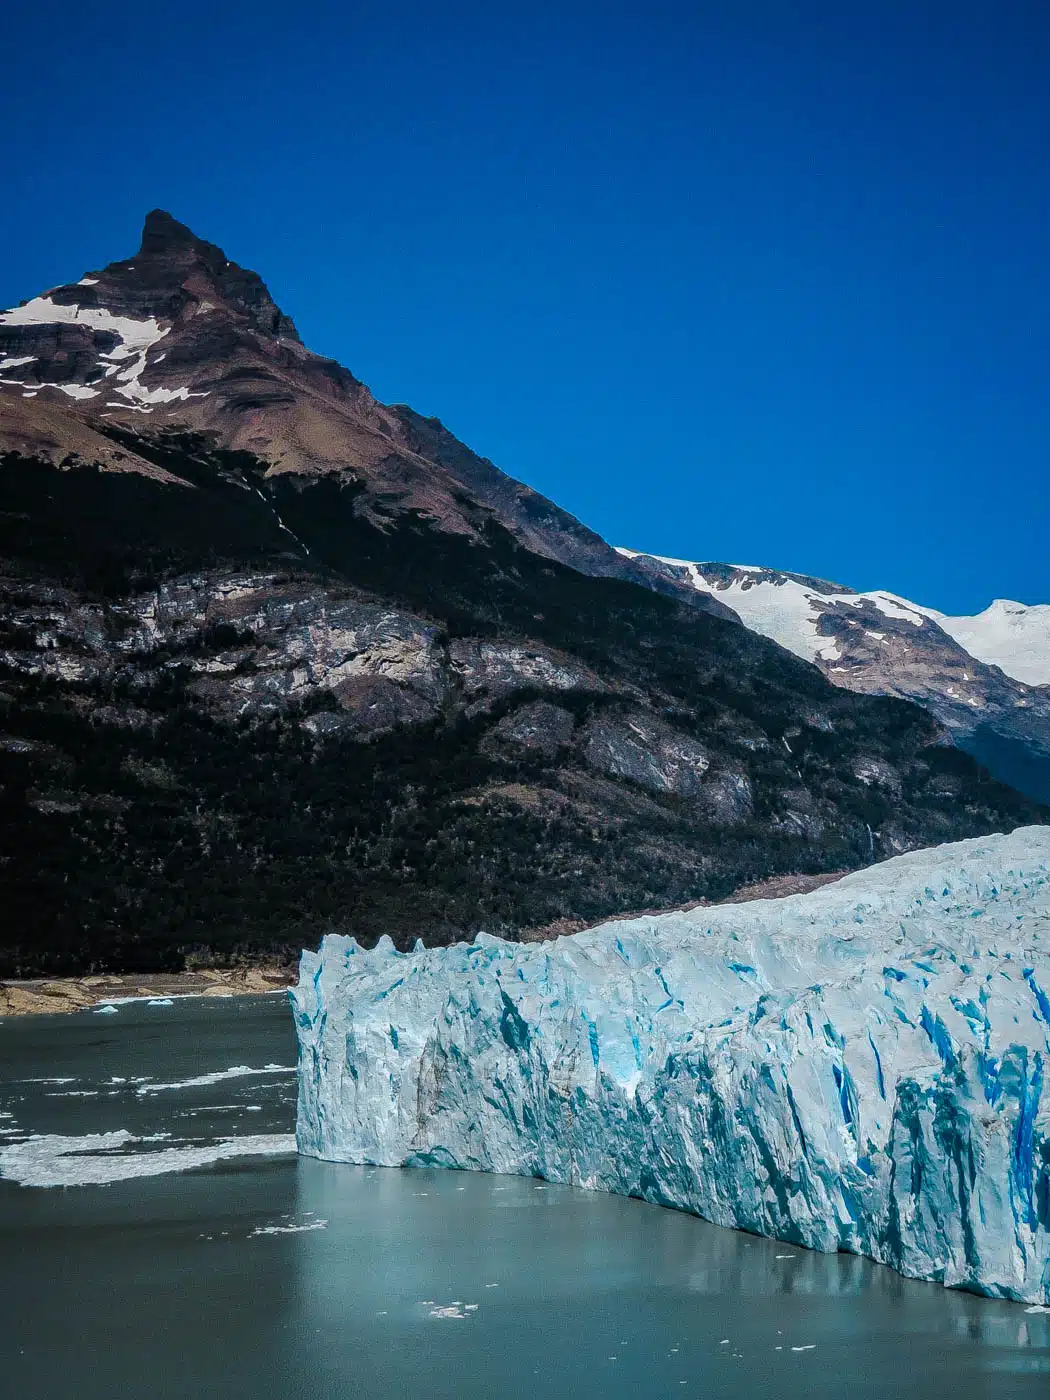 Glacier Perito Moreno I South America Travel Bucket List. 90 Awesome Things to do in South America When Backpacking and Travelling #southamerica #bucketlist #traveldestinations